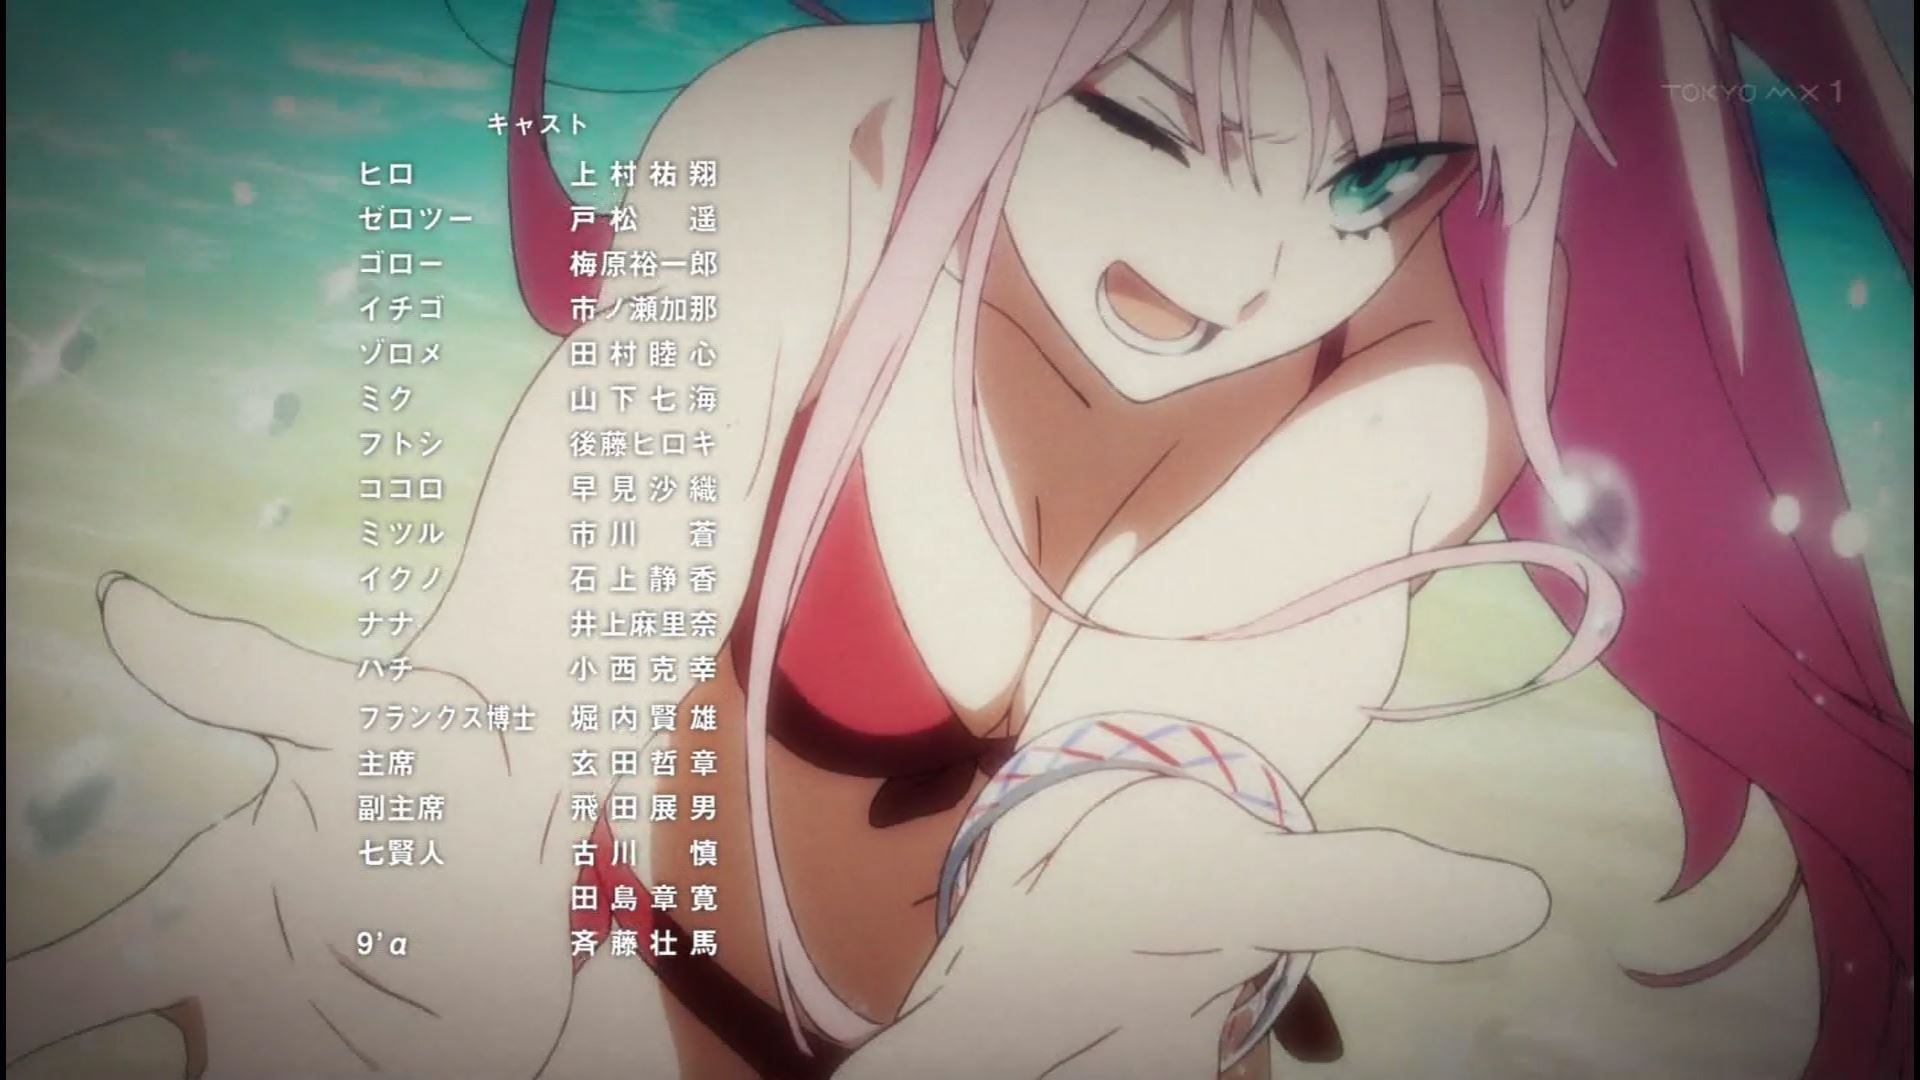 Anime [Darling in the franc kiss] seven girls erotic breasts and buttocks swimsuit times in the story! 19